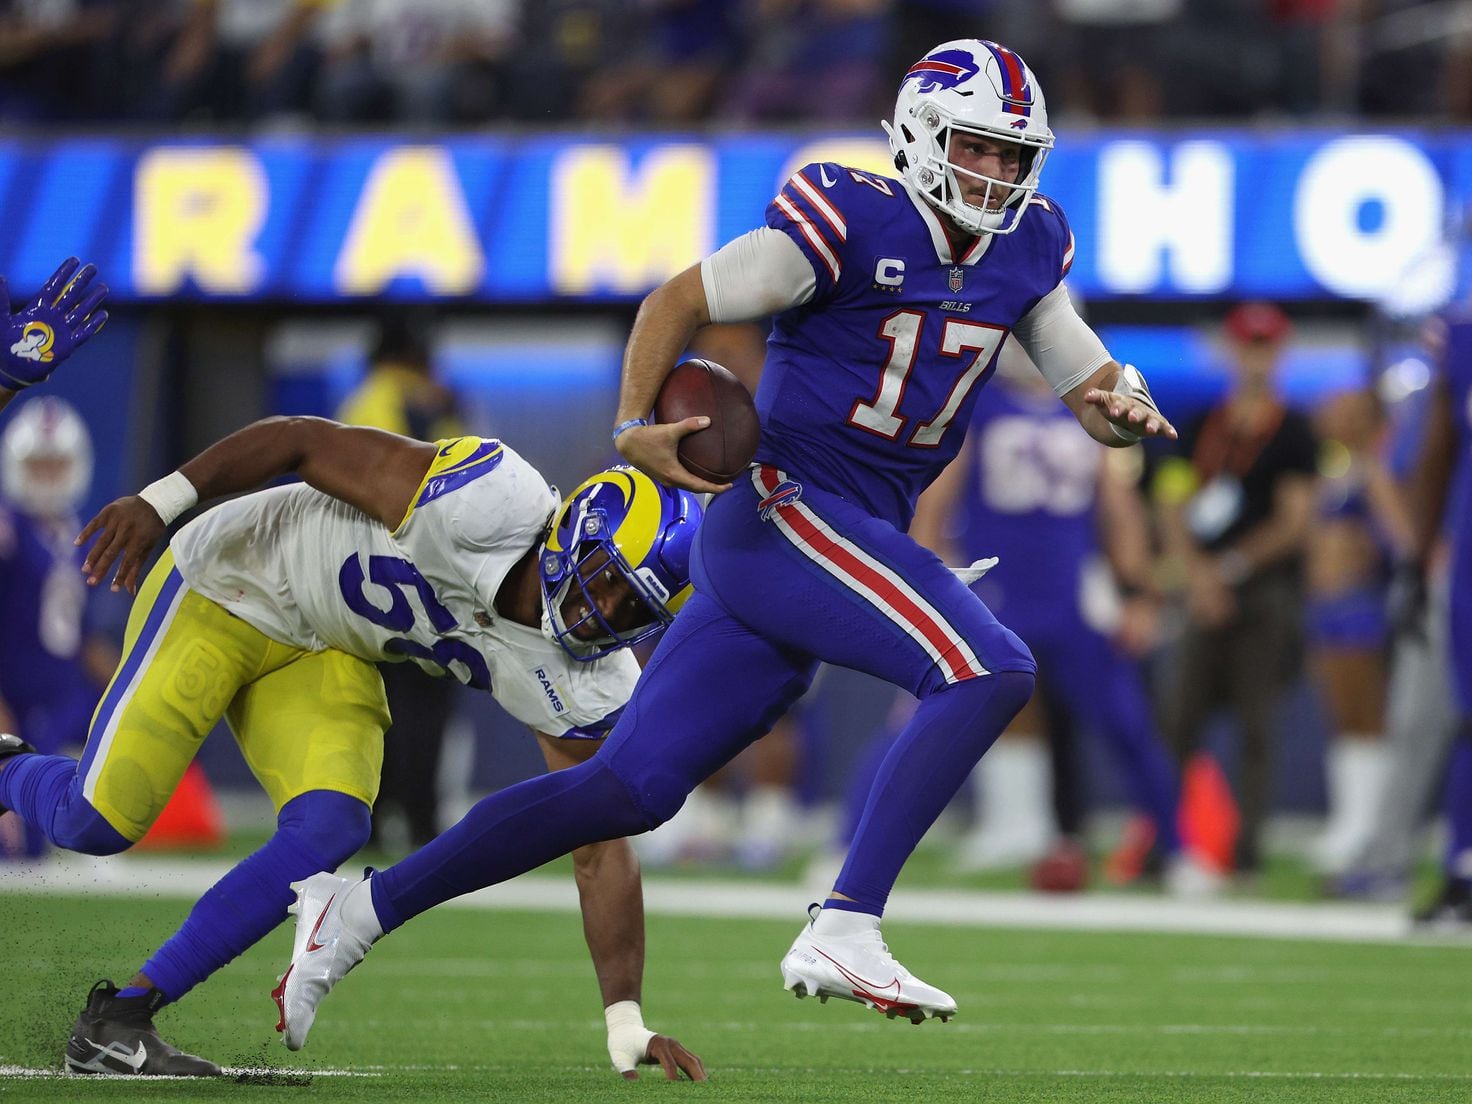 Buffalo Bills tied for highest over/under win total for 2022